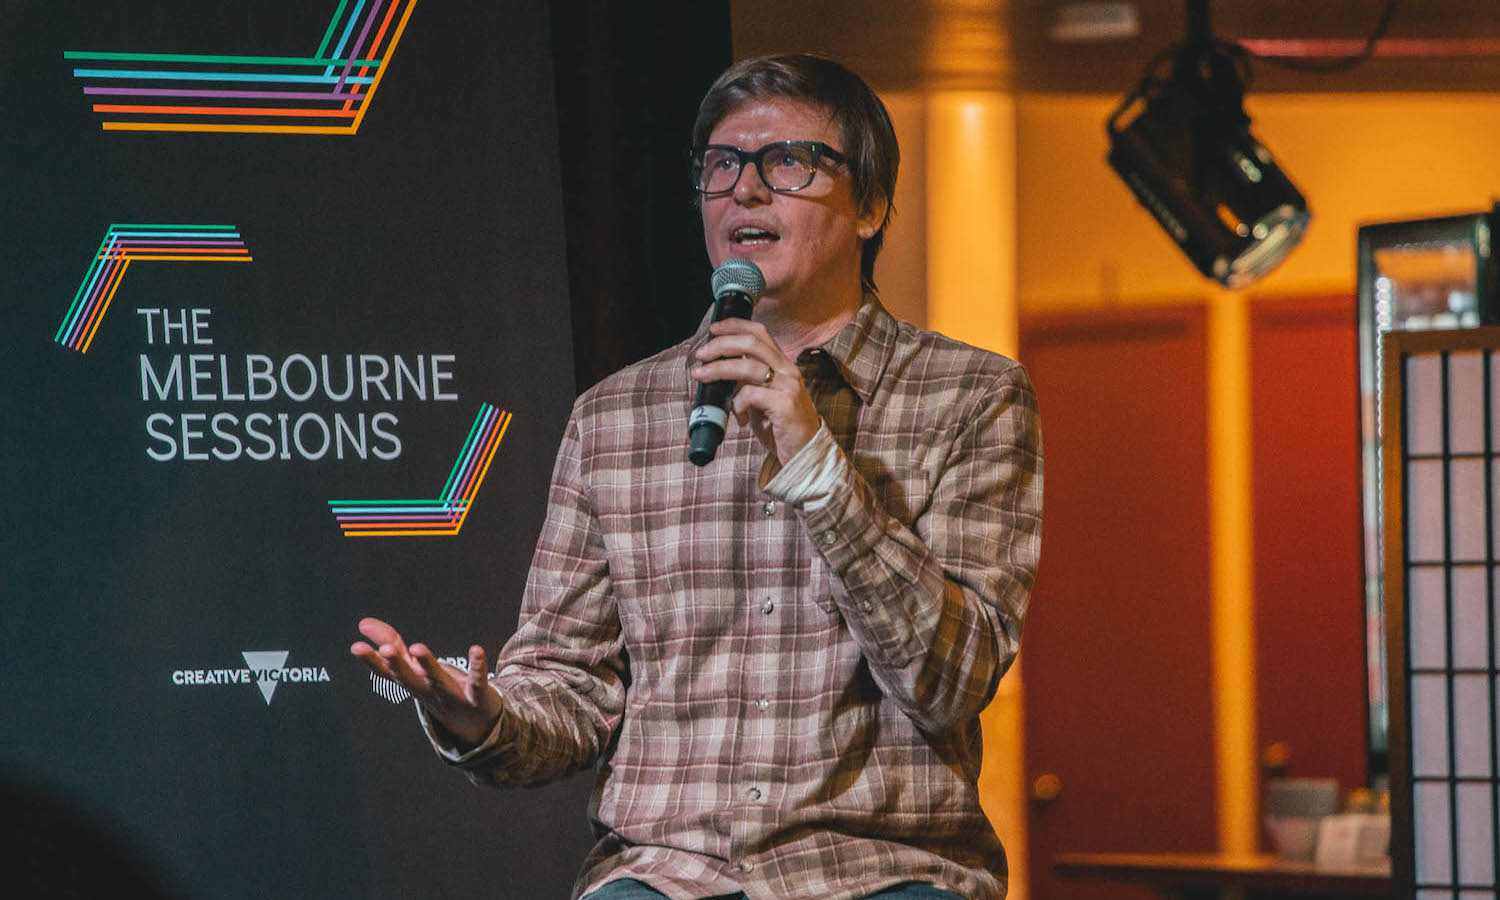 Songwriting, singles & studio set-ups: 9 lessons from APRA’s Melbourne Sessions